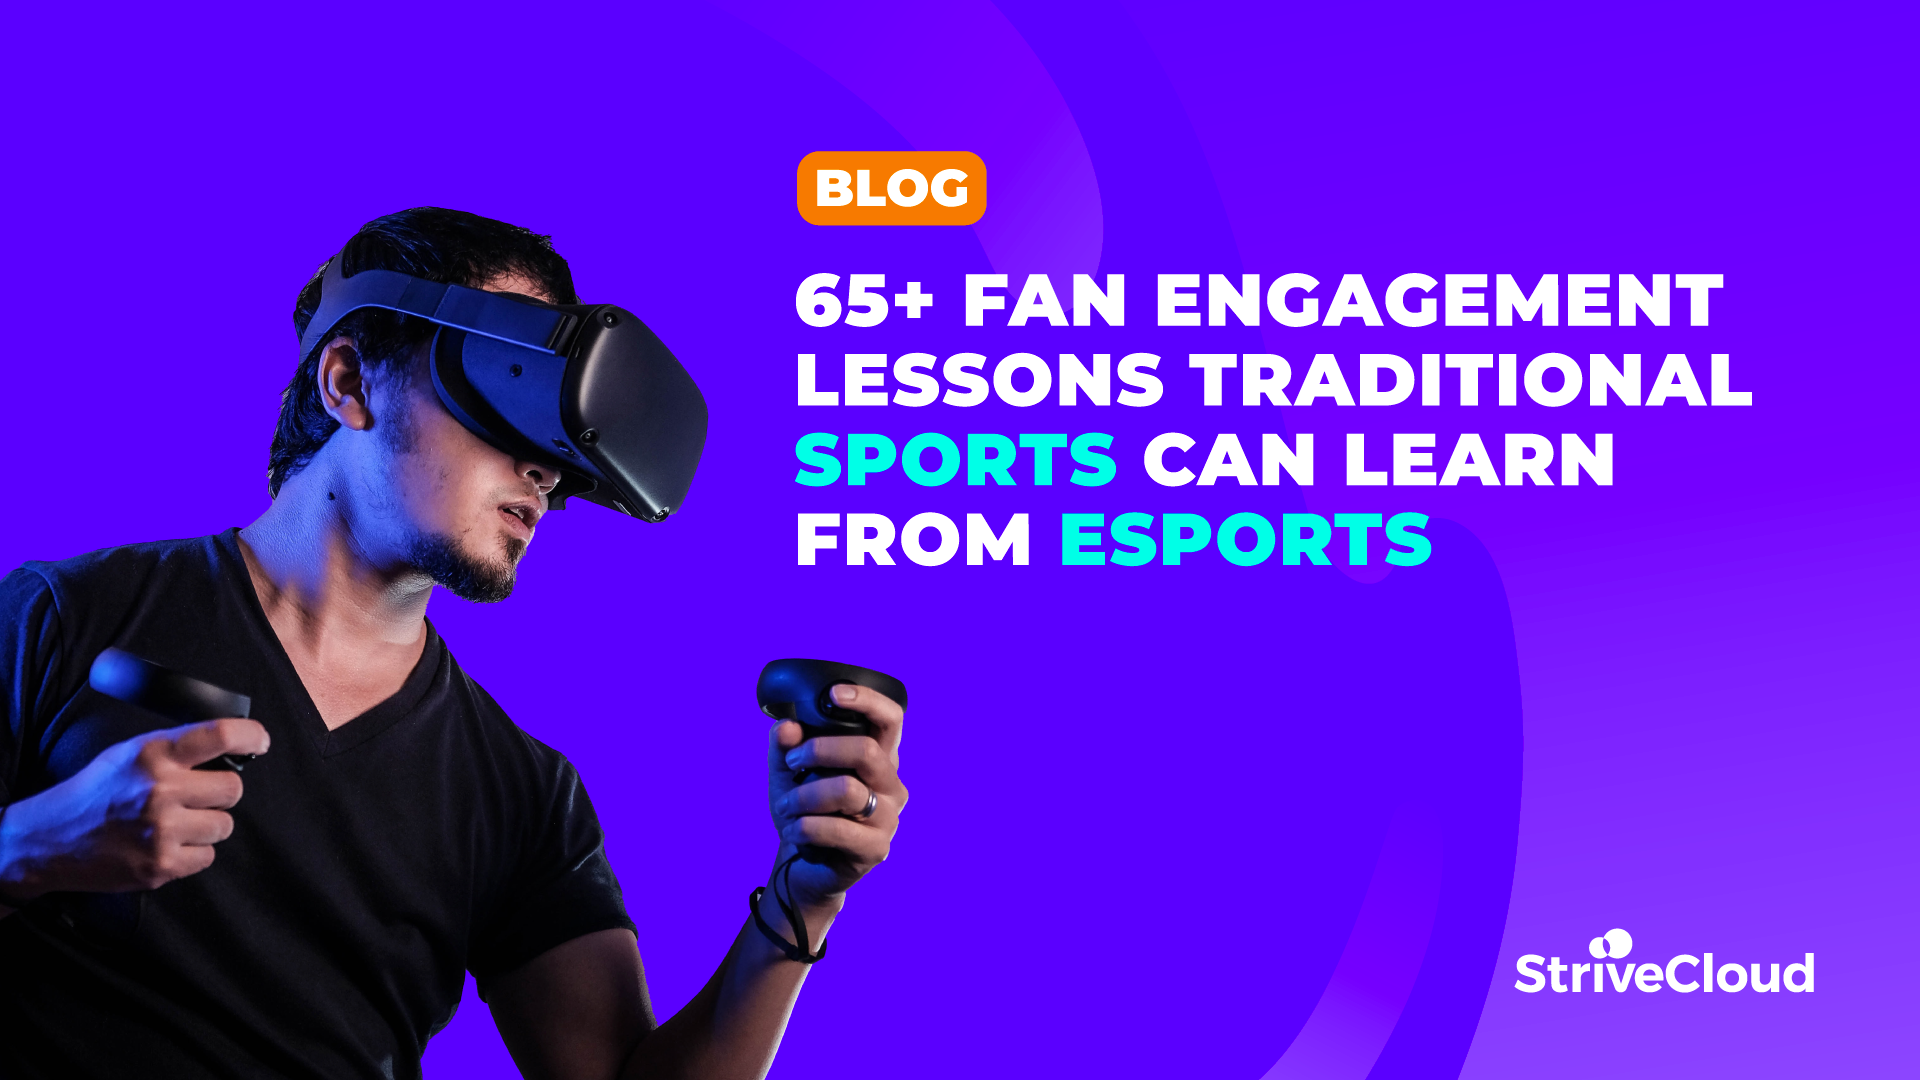 65+ fan engagement lessons traditional sports can learn from esports (updated in 2022)